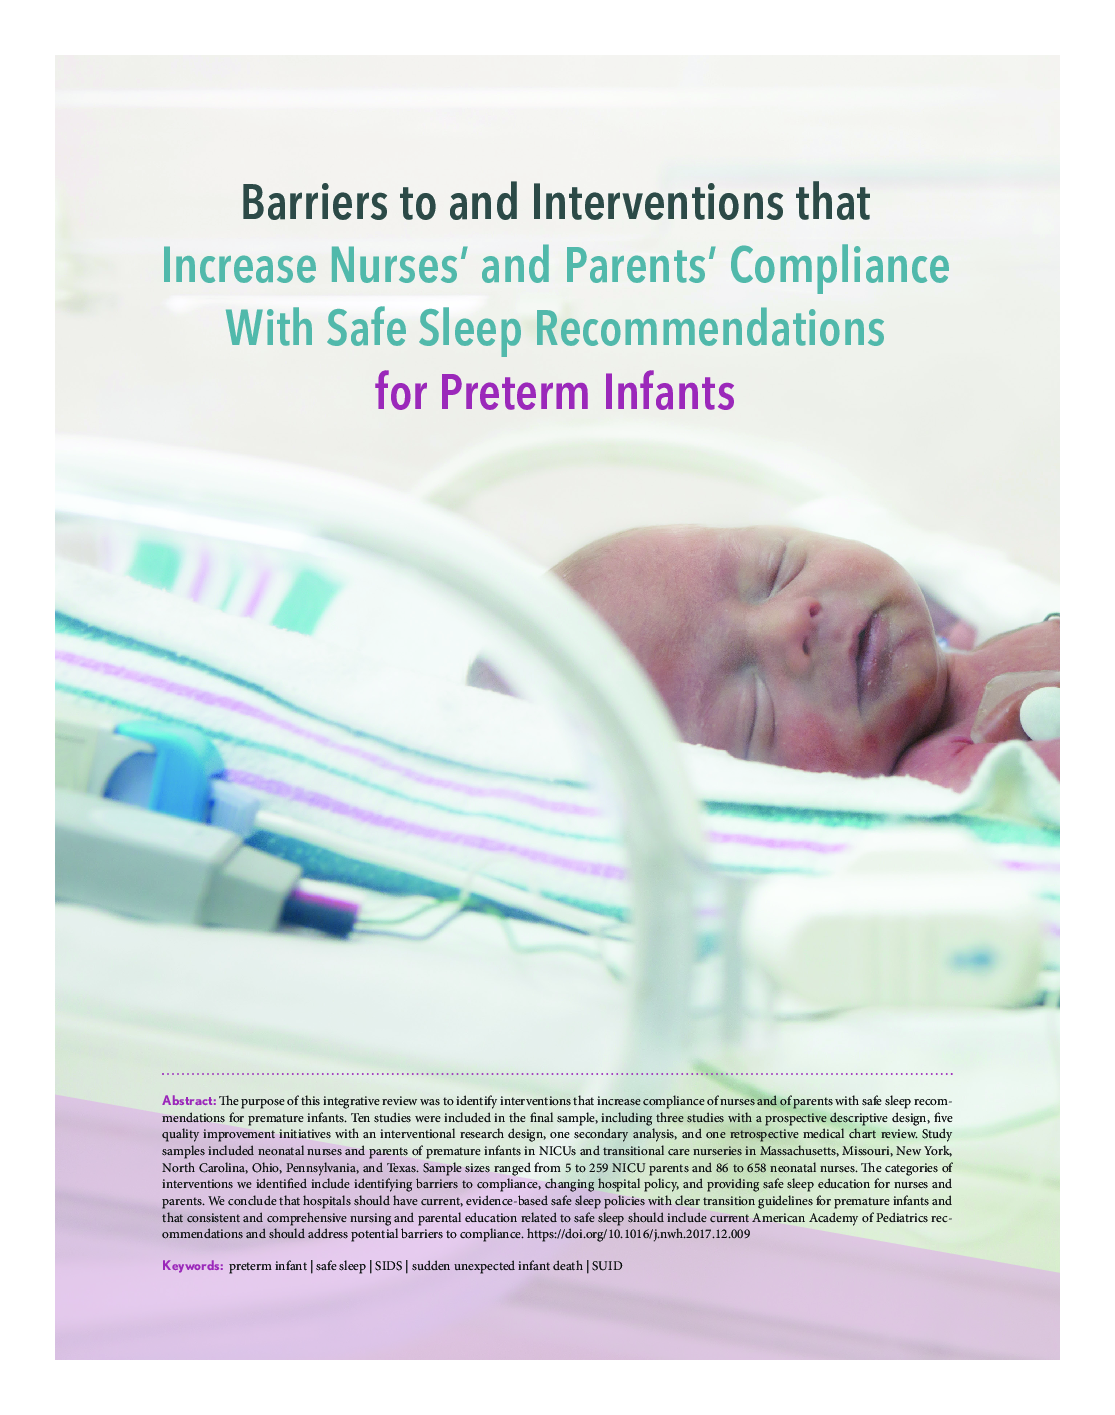 Barriers to and Interventions that Increase Nurses' and Parents' Compliance With Safe Sleep Recommendations for Preterm Infants